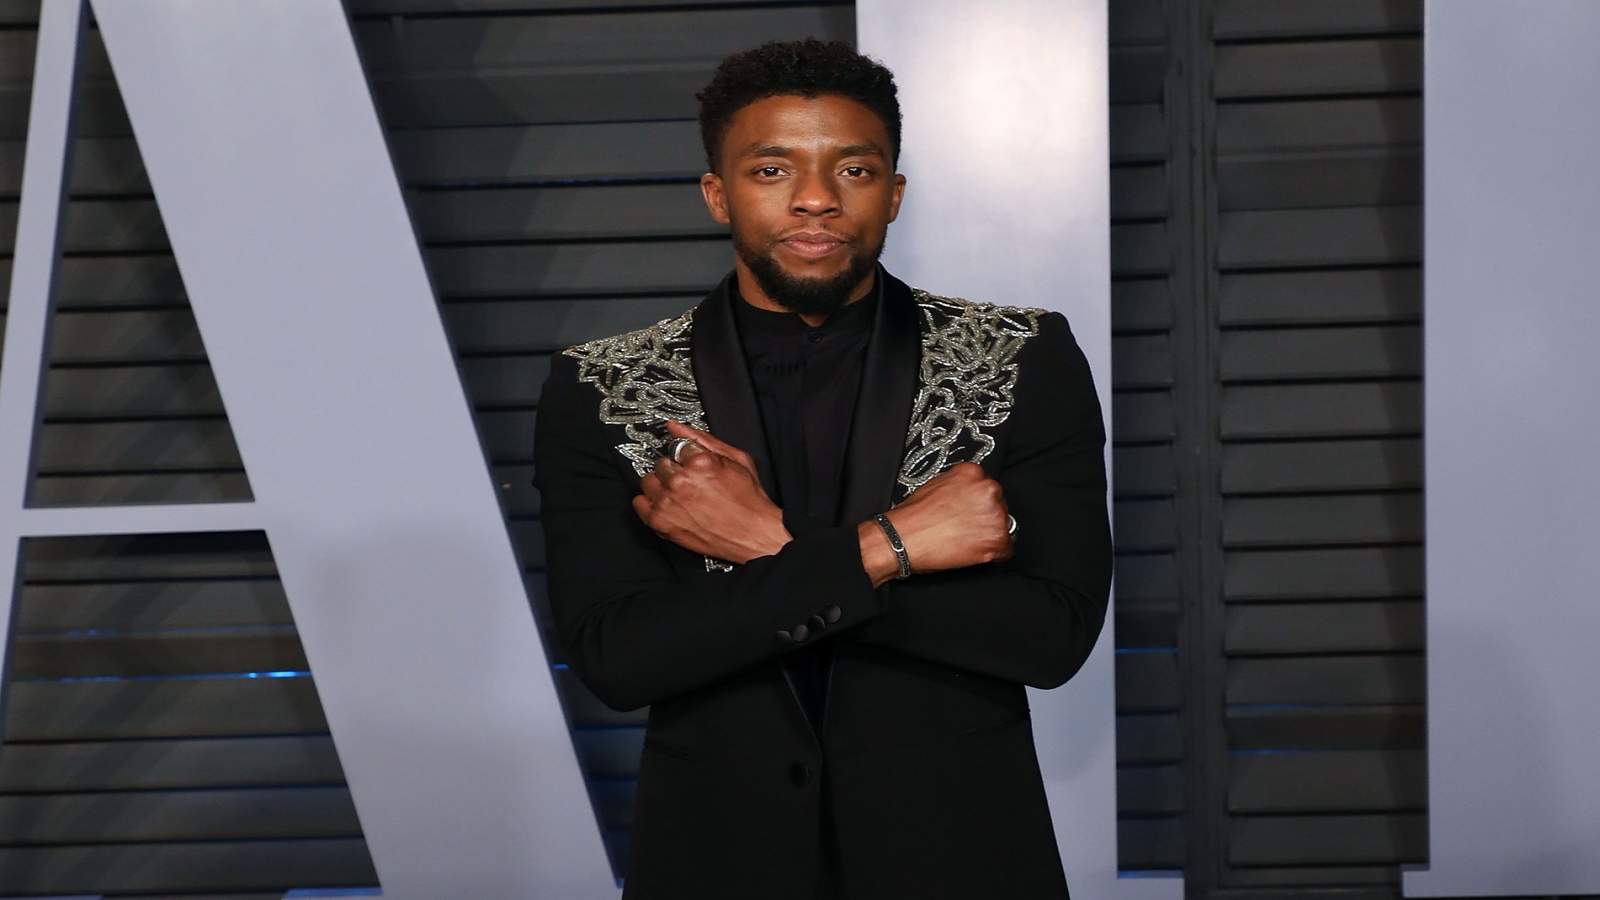 Tributes pour in on social media as world mourns loss of Chadwick Boseman